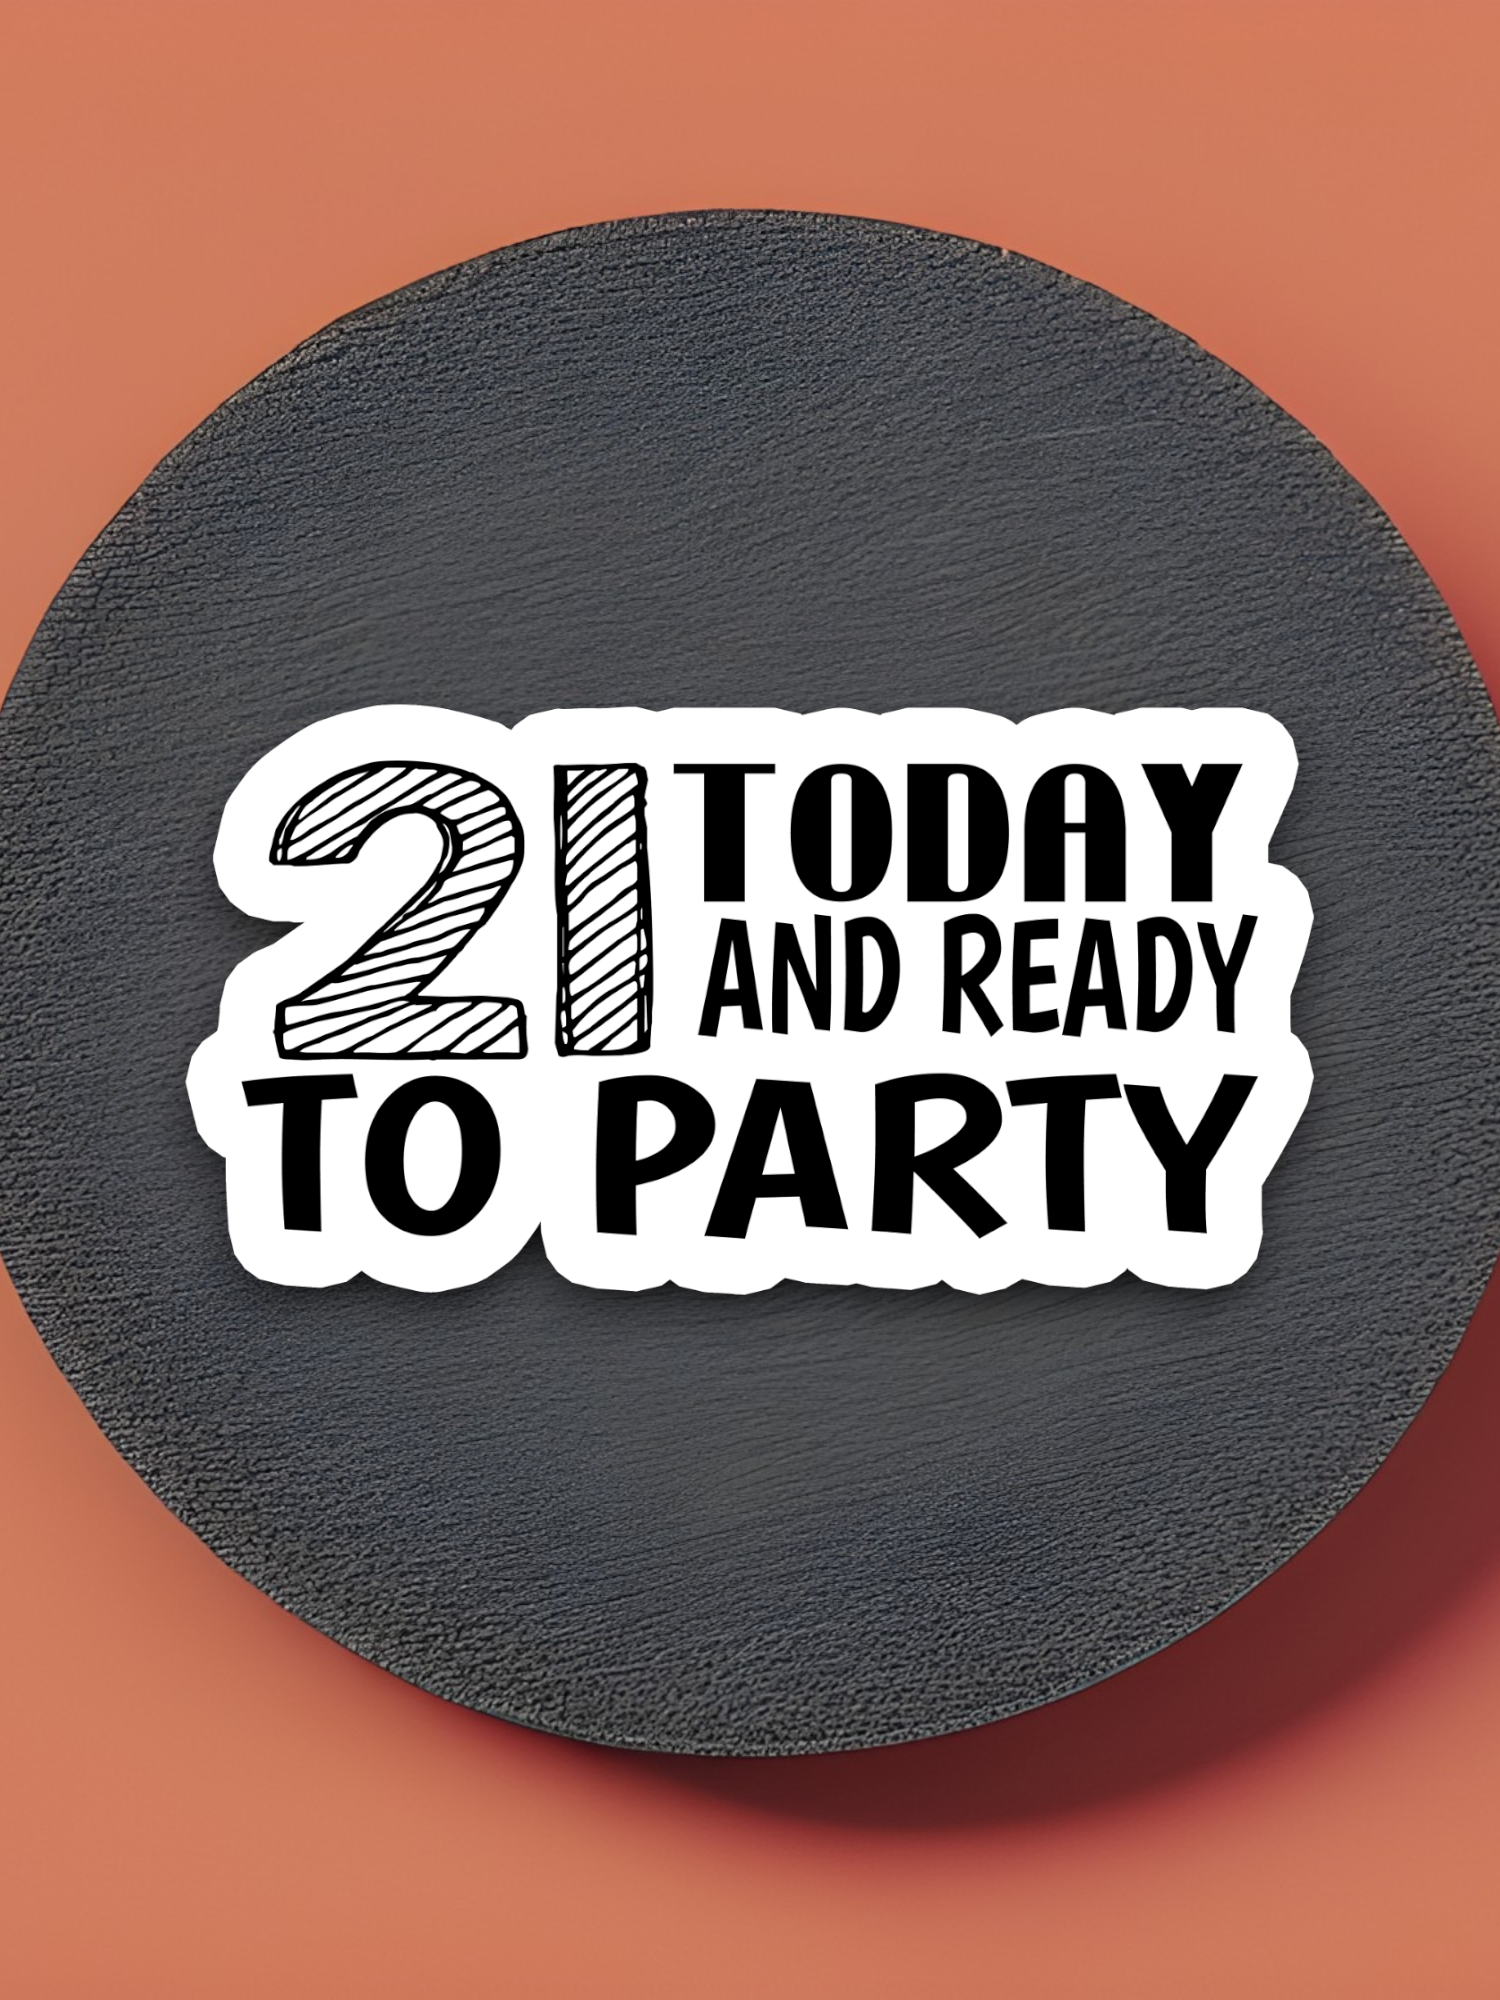 21 Today and Ready to Party Sticker